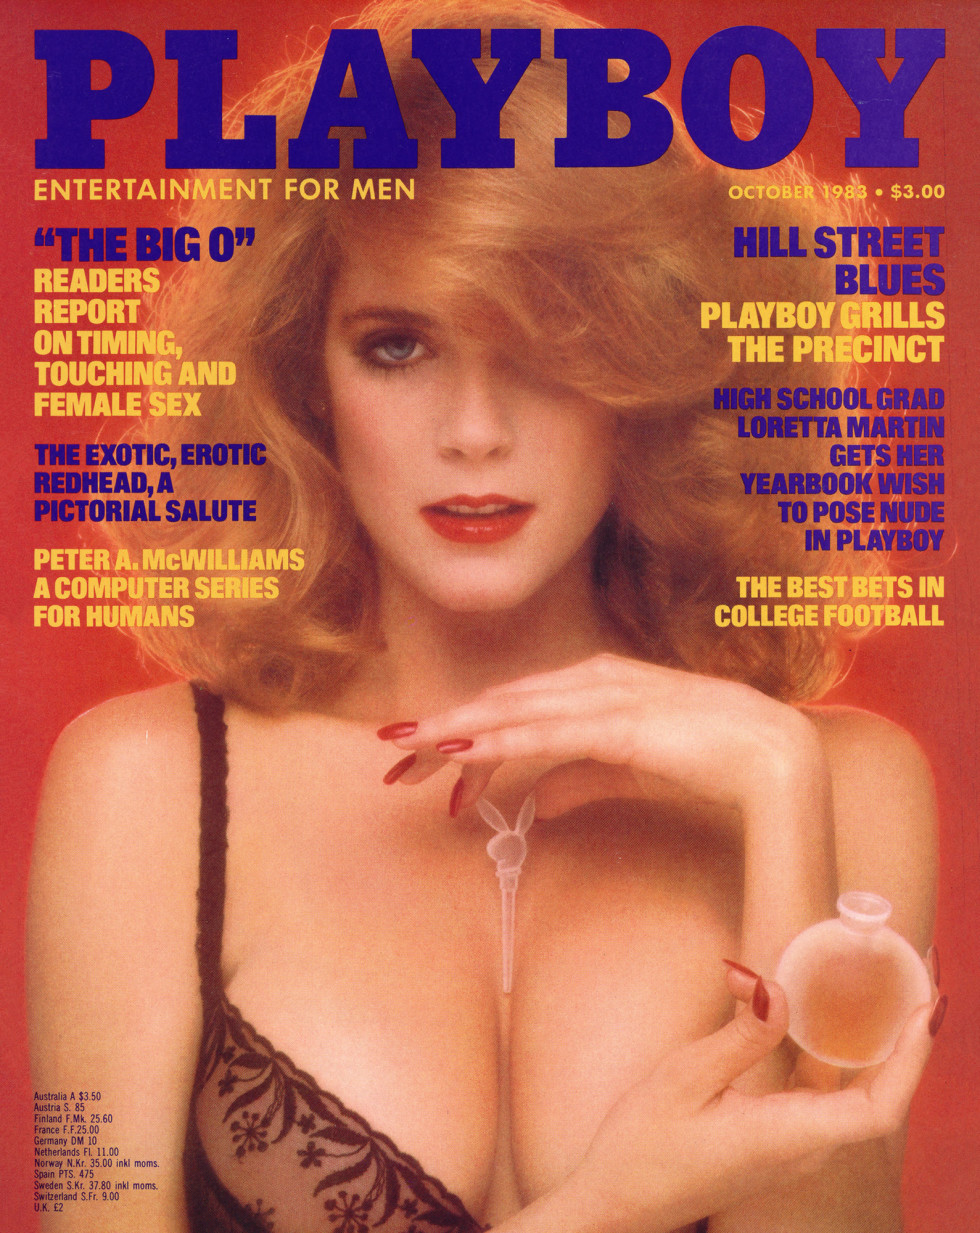 7 Playboy Bunnies Recreate Their Iconic Covers 30 Years ...